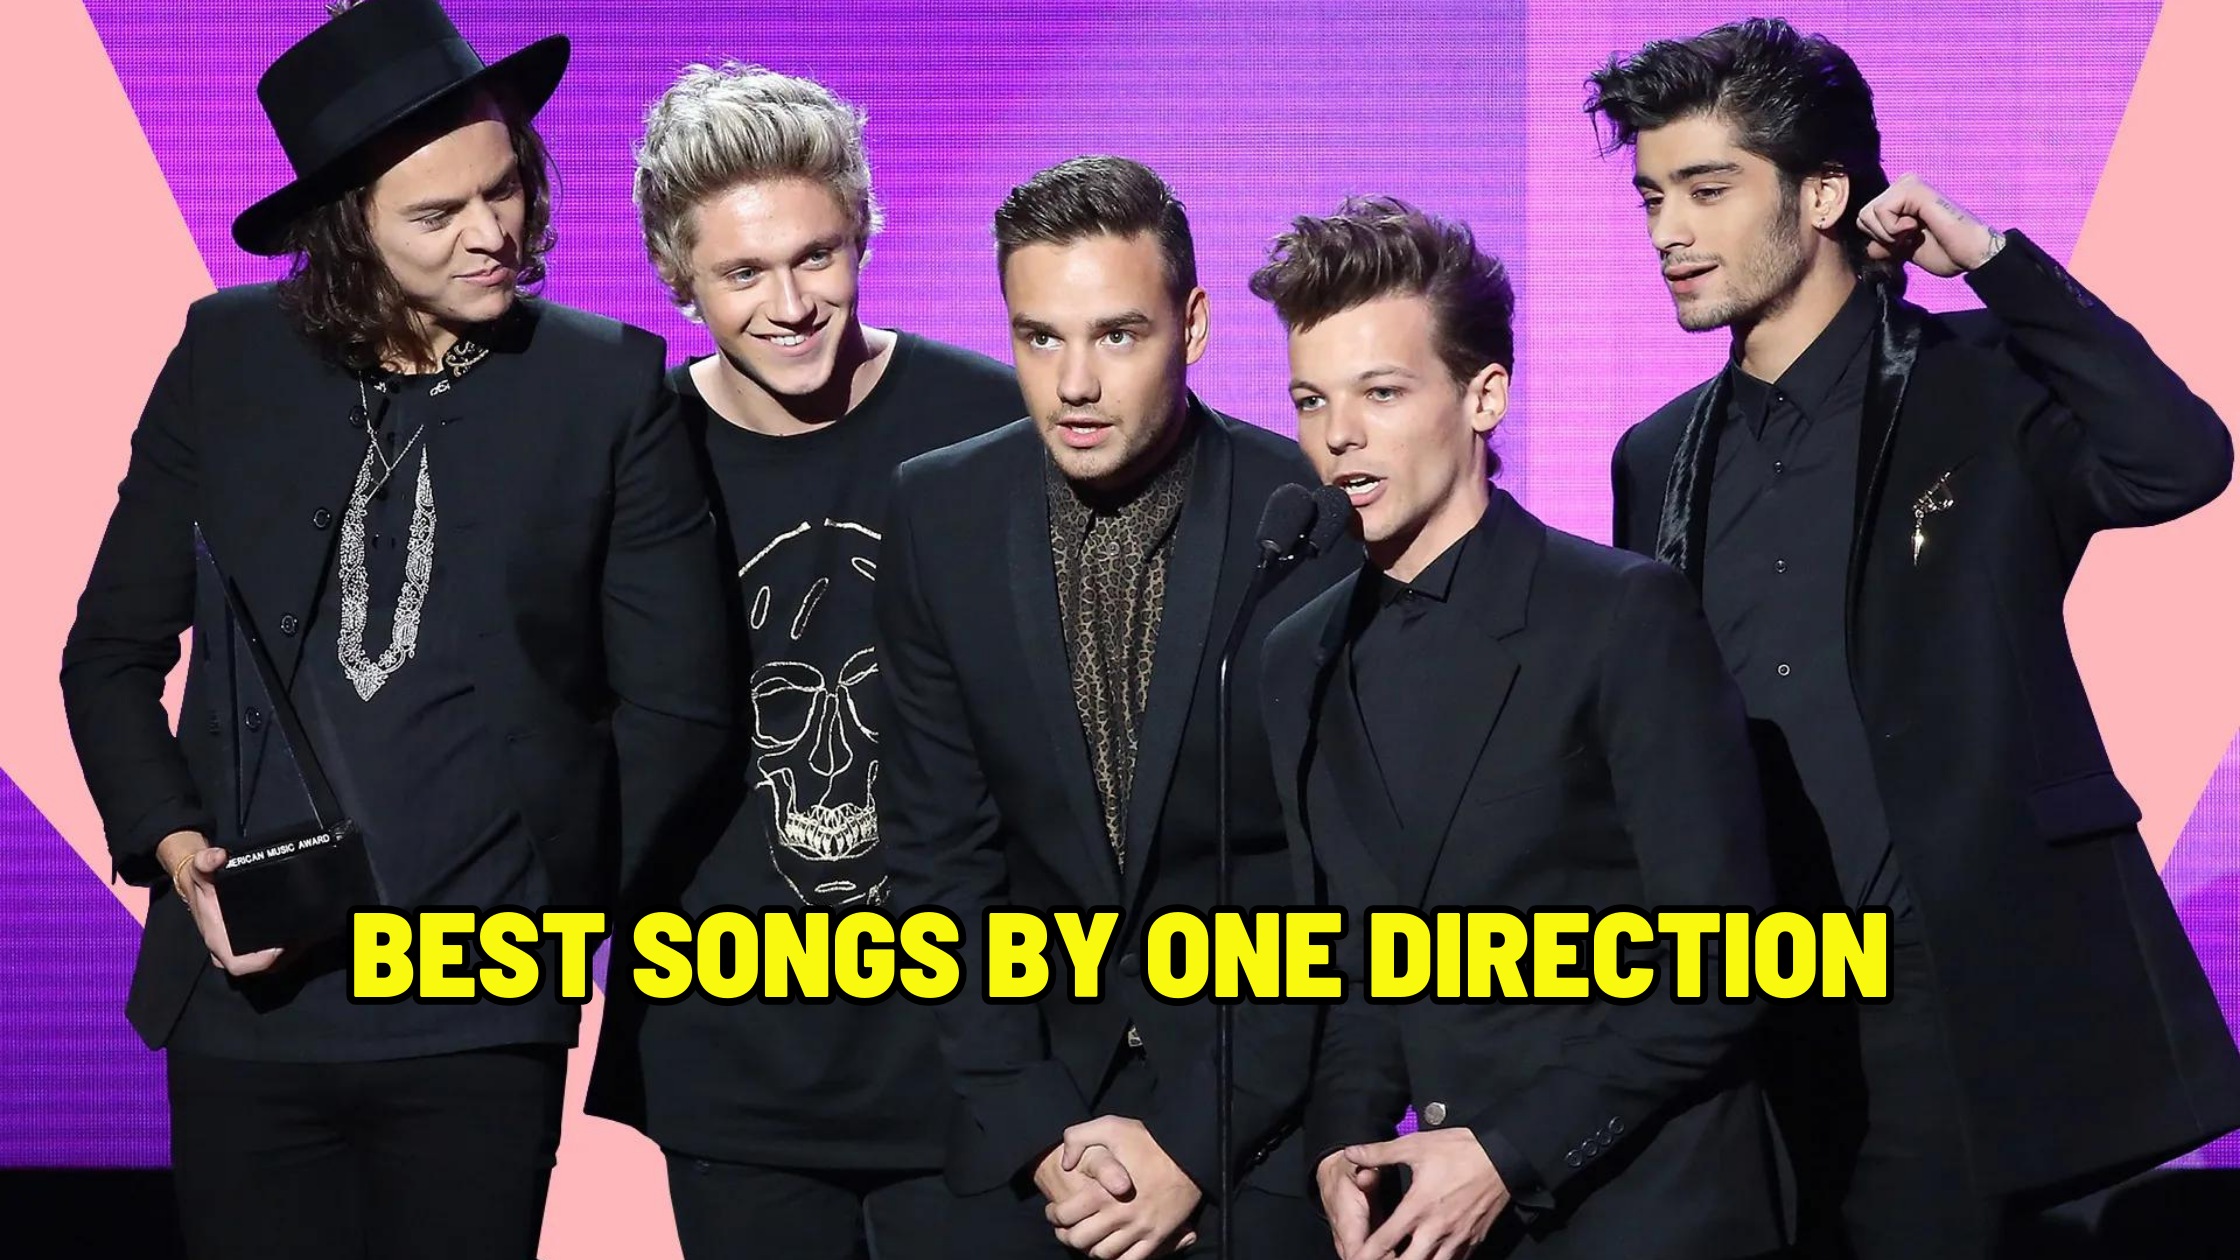 7 Best Songs By One Direction Of All Time: A Musical Journey with the Fab Five